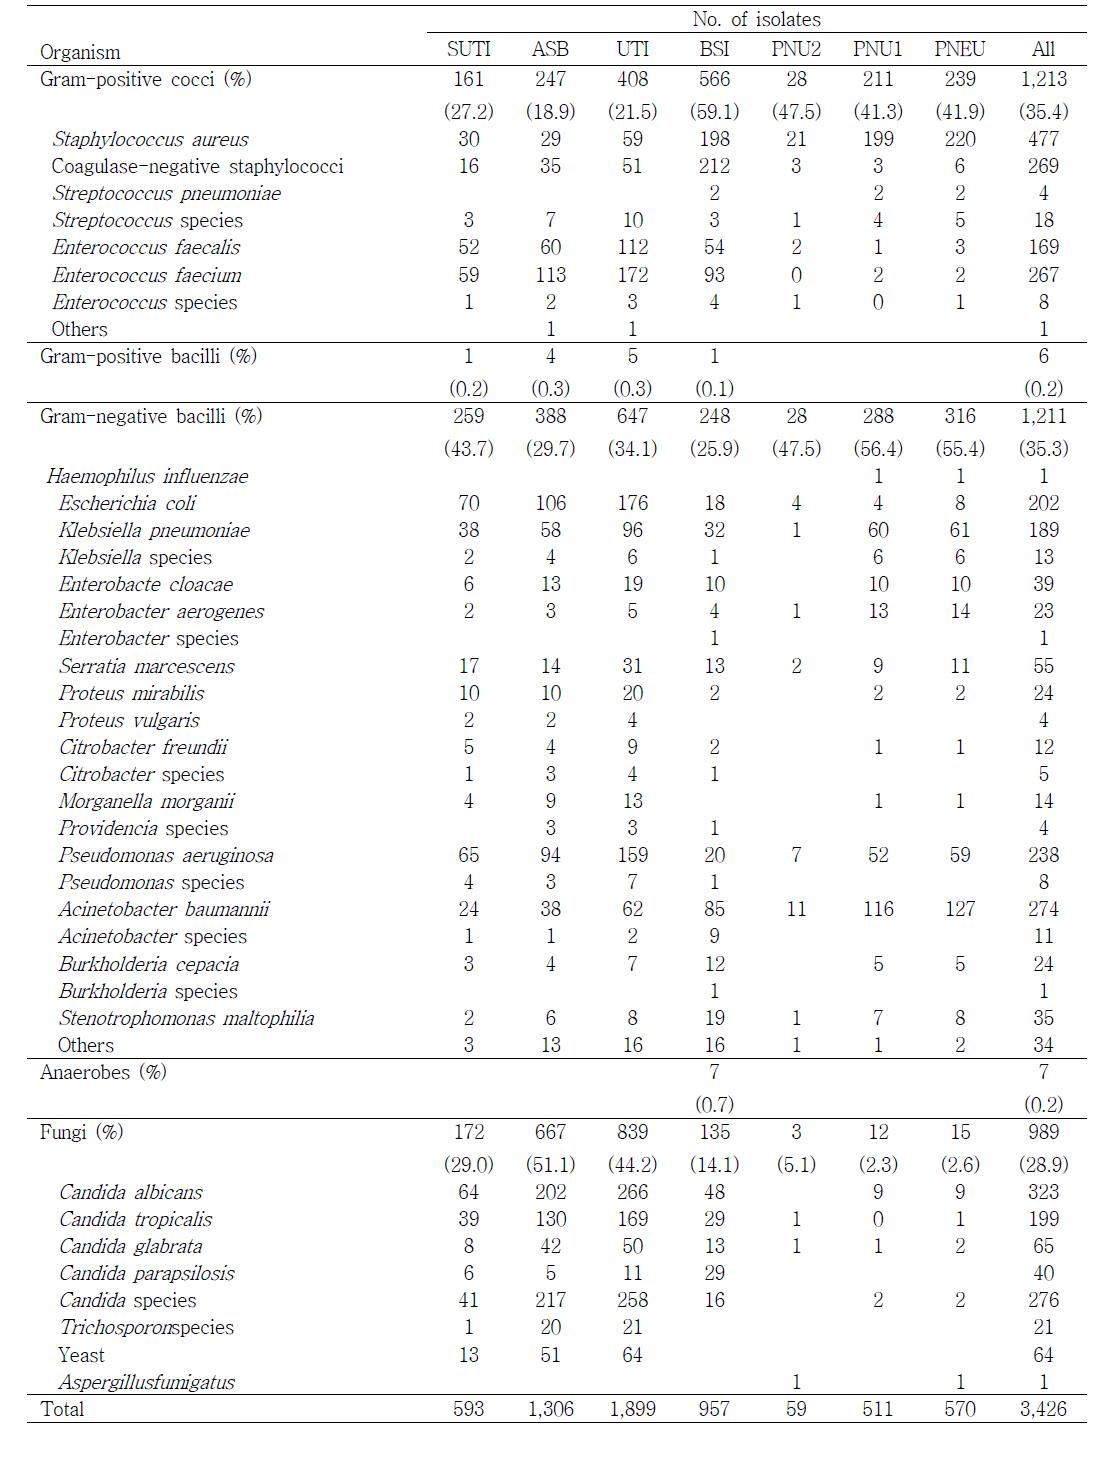 Number (%) of microorganisms isolated from clinical specimens of patients withnosocomial infections